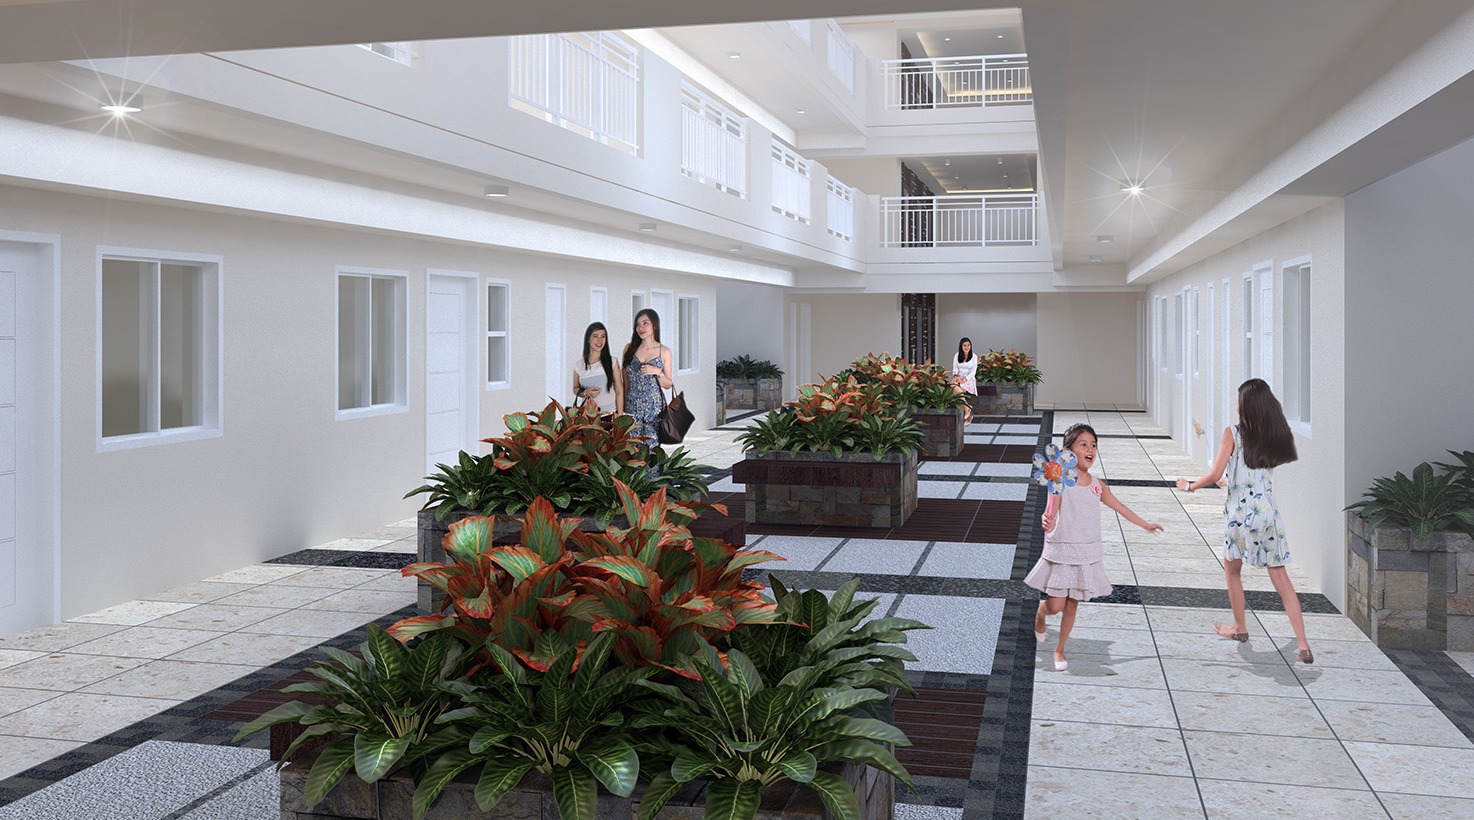 Landscaped atriums, which is a component of DMCI Homes’ Lumiventt® Design Technology, bring the outdoor feels inside the buildings.